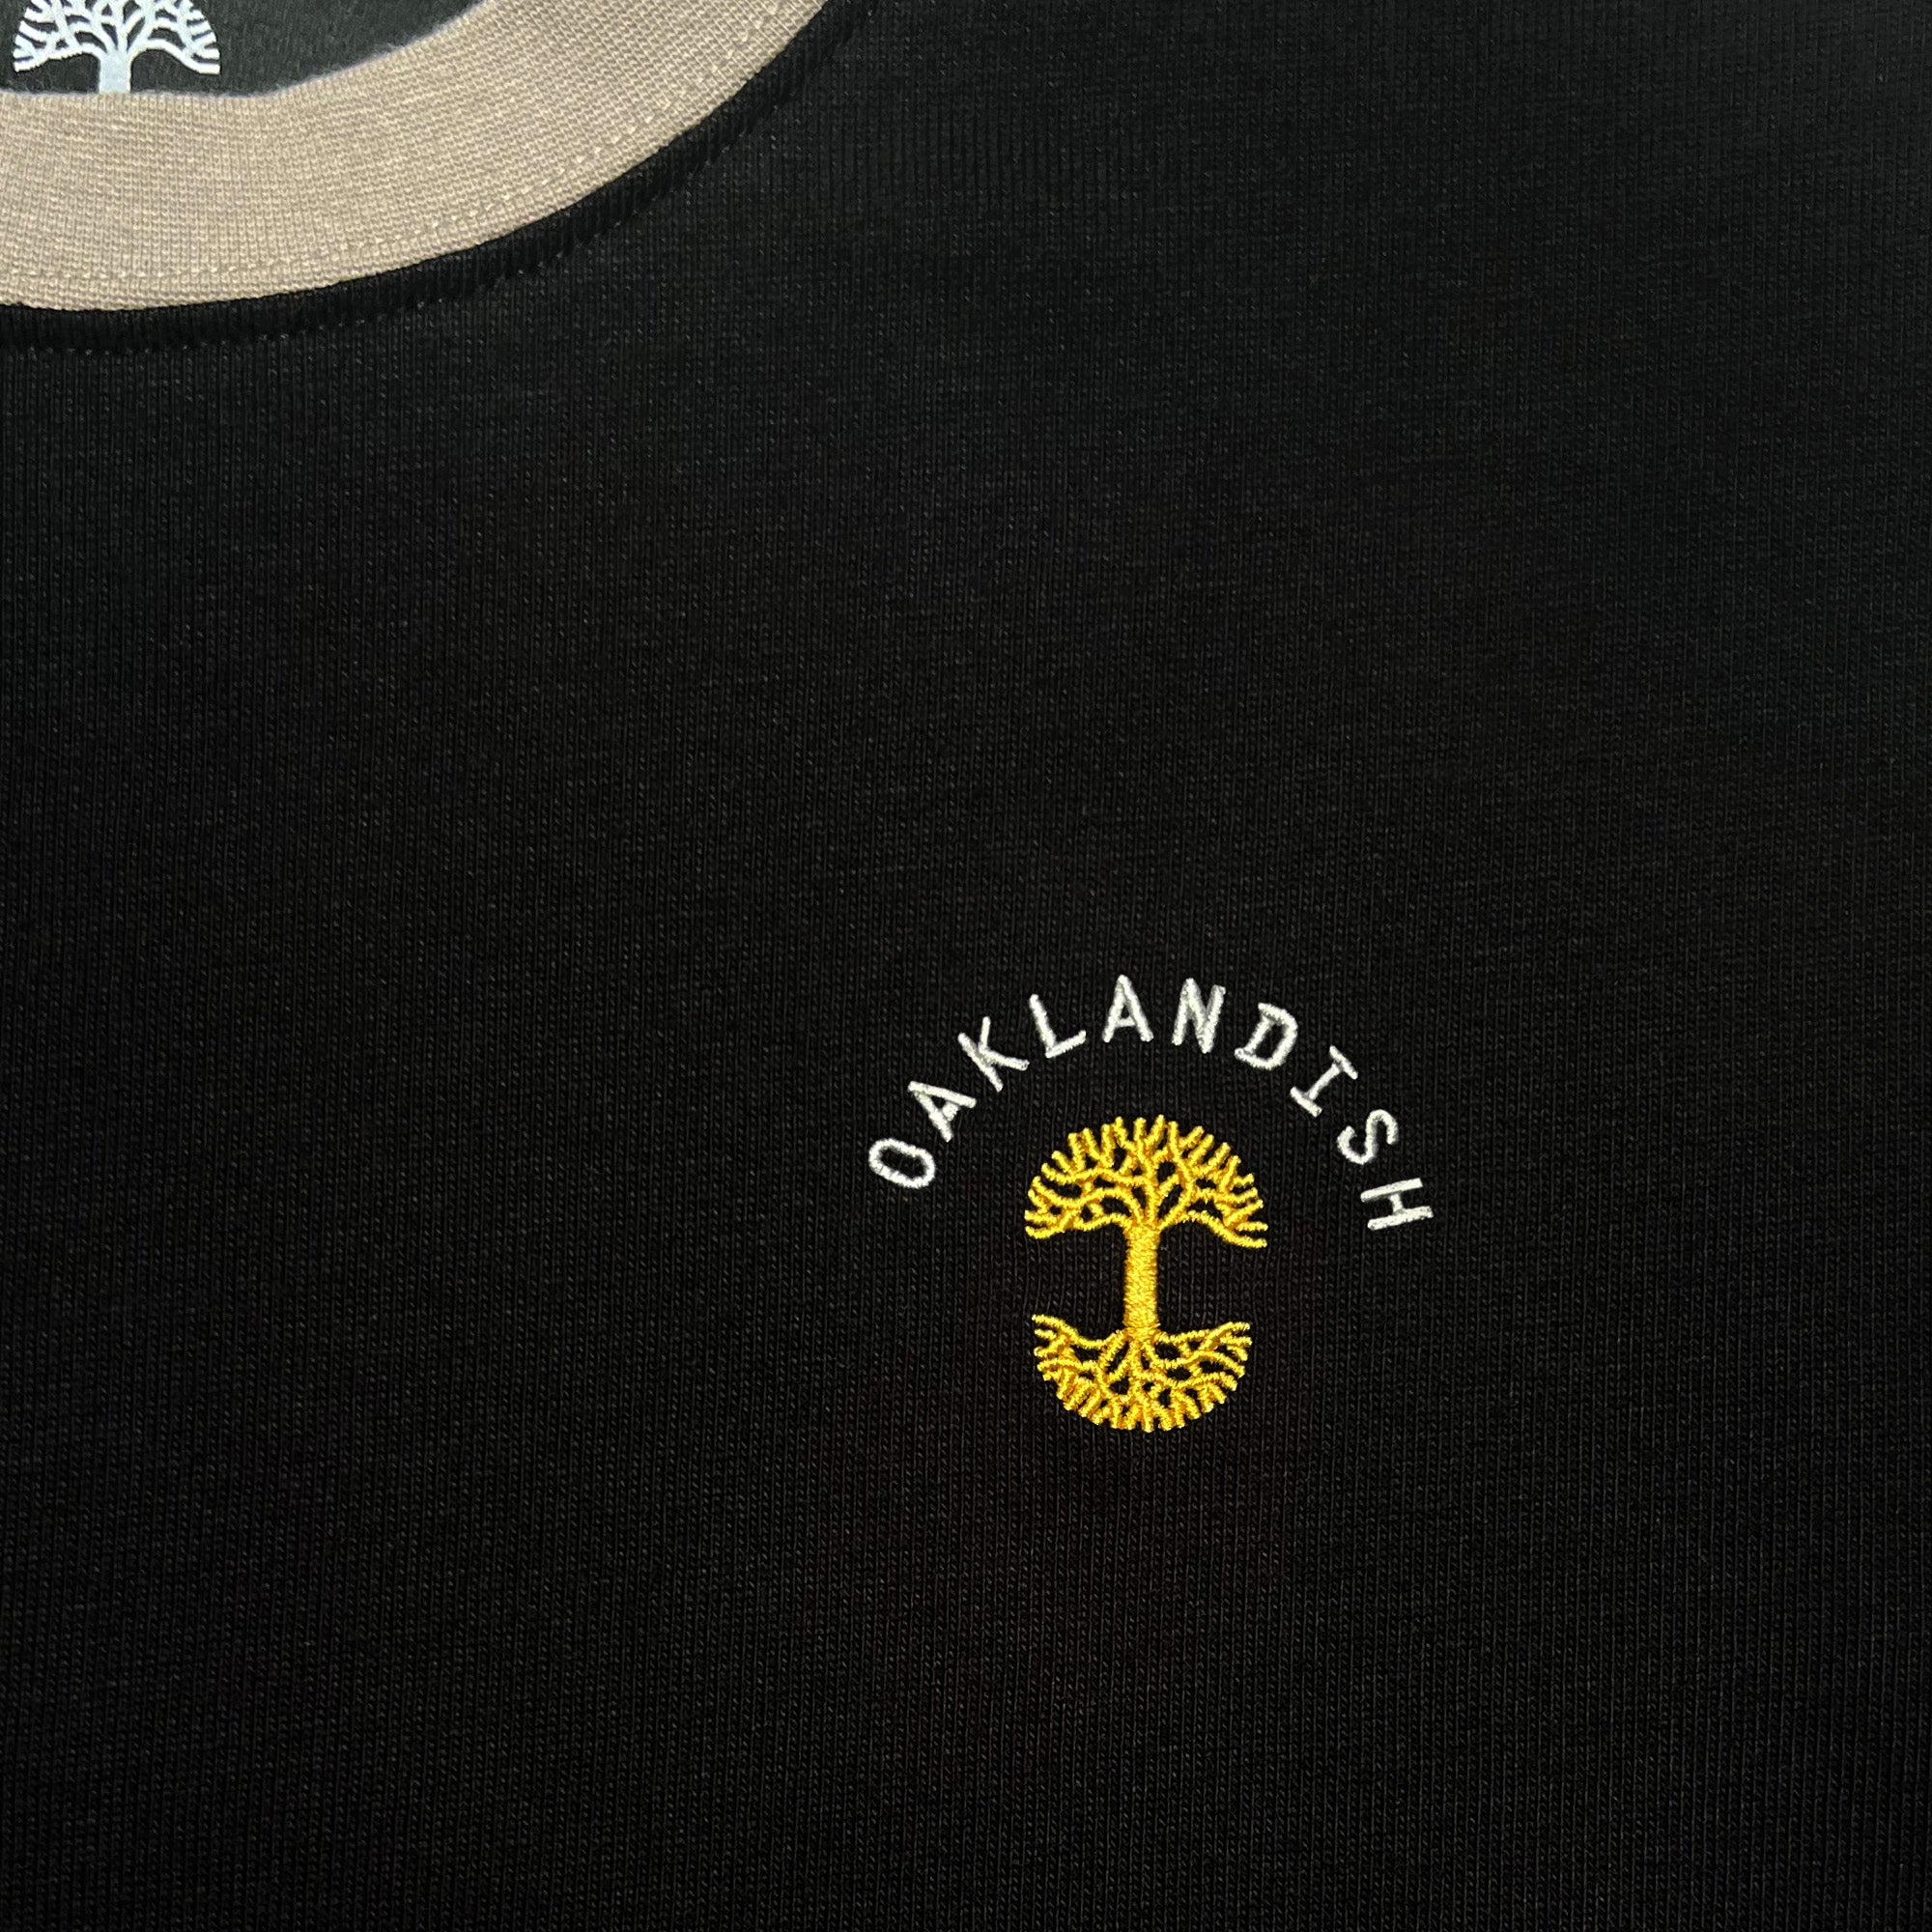 Close-up of embroidered gold Oaklandish tree logo, white wordmark on the chest of a black long-sleeve t-shirt.